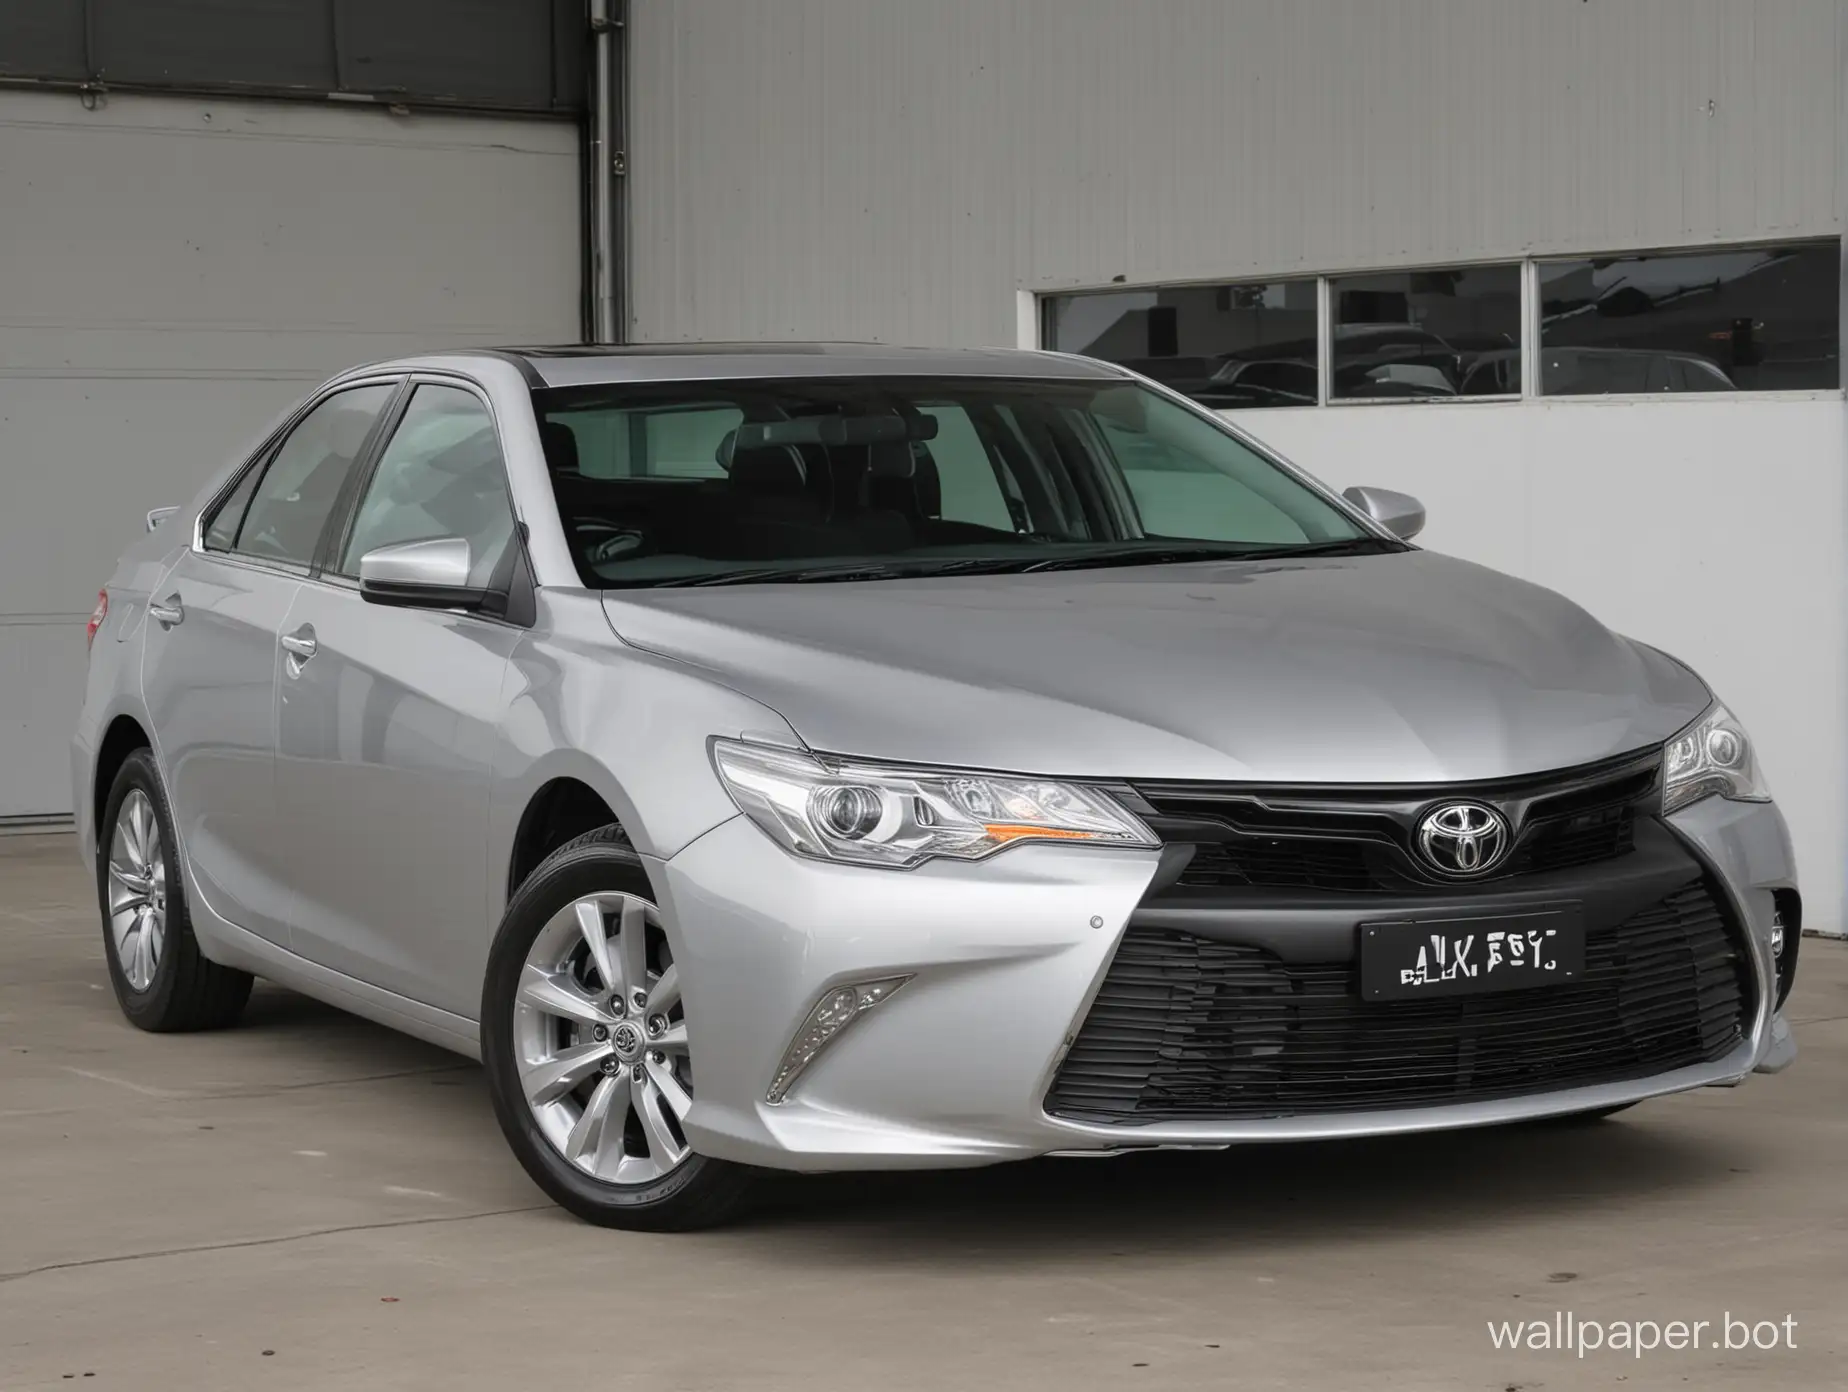 2015 Toyota Camry Altise, silver grey, detailed features, sharp image